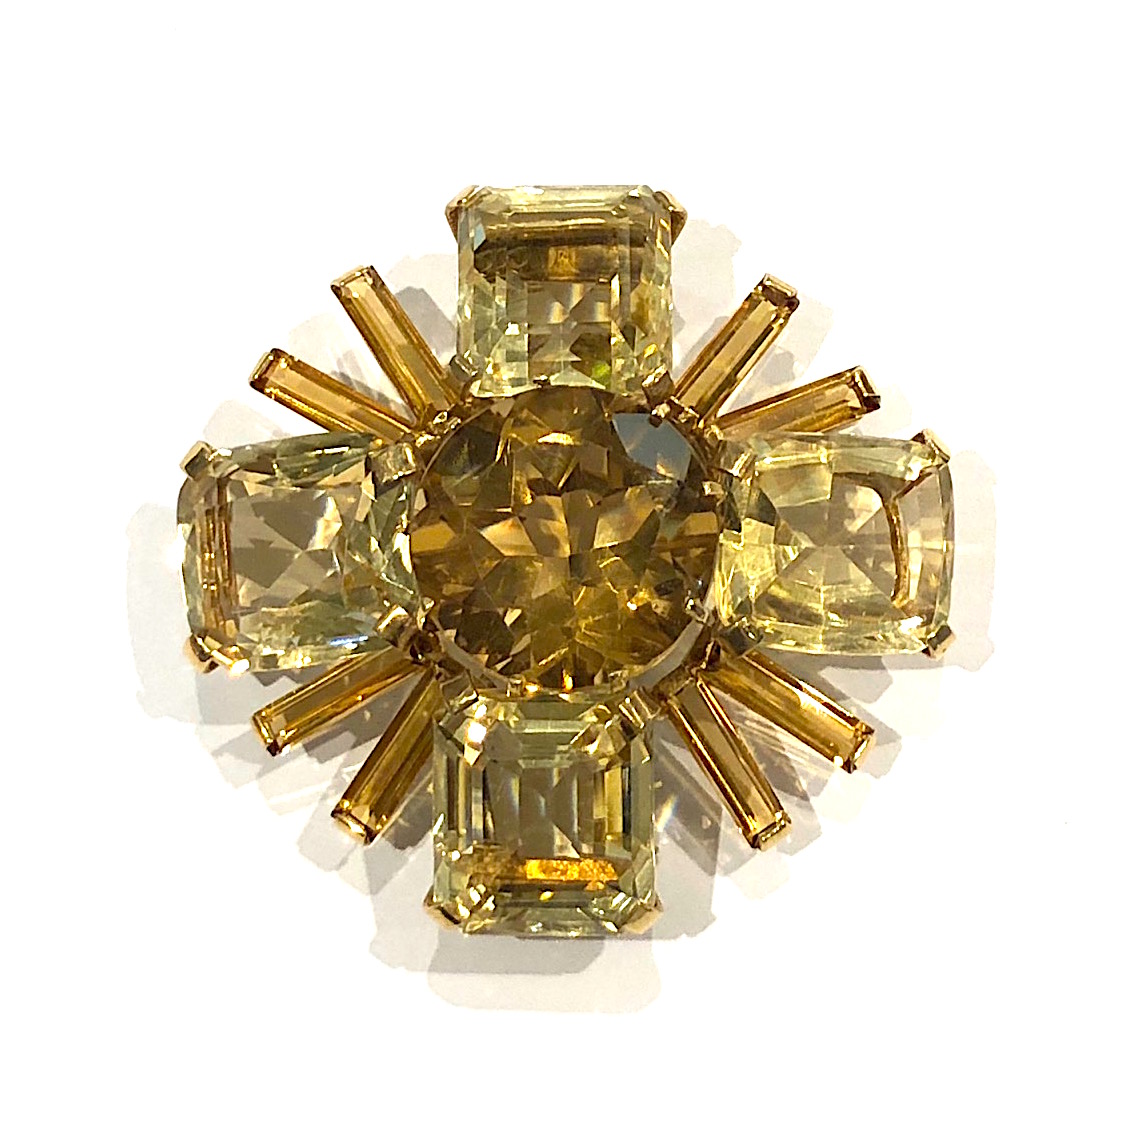 Seaman Schepps, New York  “Maltese Cross” brooch, one large round cut central citrine (approx. 45 carats) set with 4 large square step-cut citrines (approx. 108 carats TW) and further set with four extra long baguette citrines (approx. 13 carats TW) in a radiating pattern set in 14k yellow gold (total citrine carat weight of 166 carats), signed: Seaman Schepps, 14k, c. 1940’s